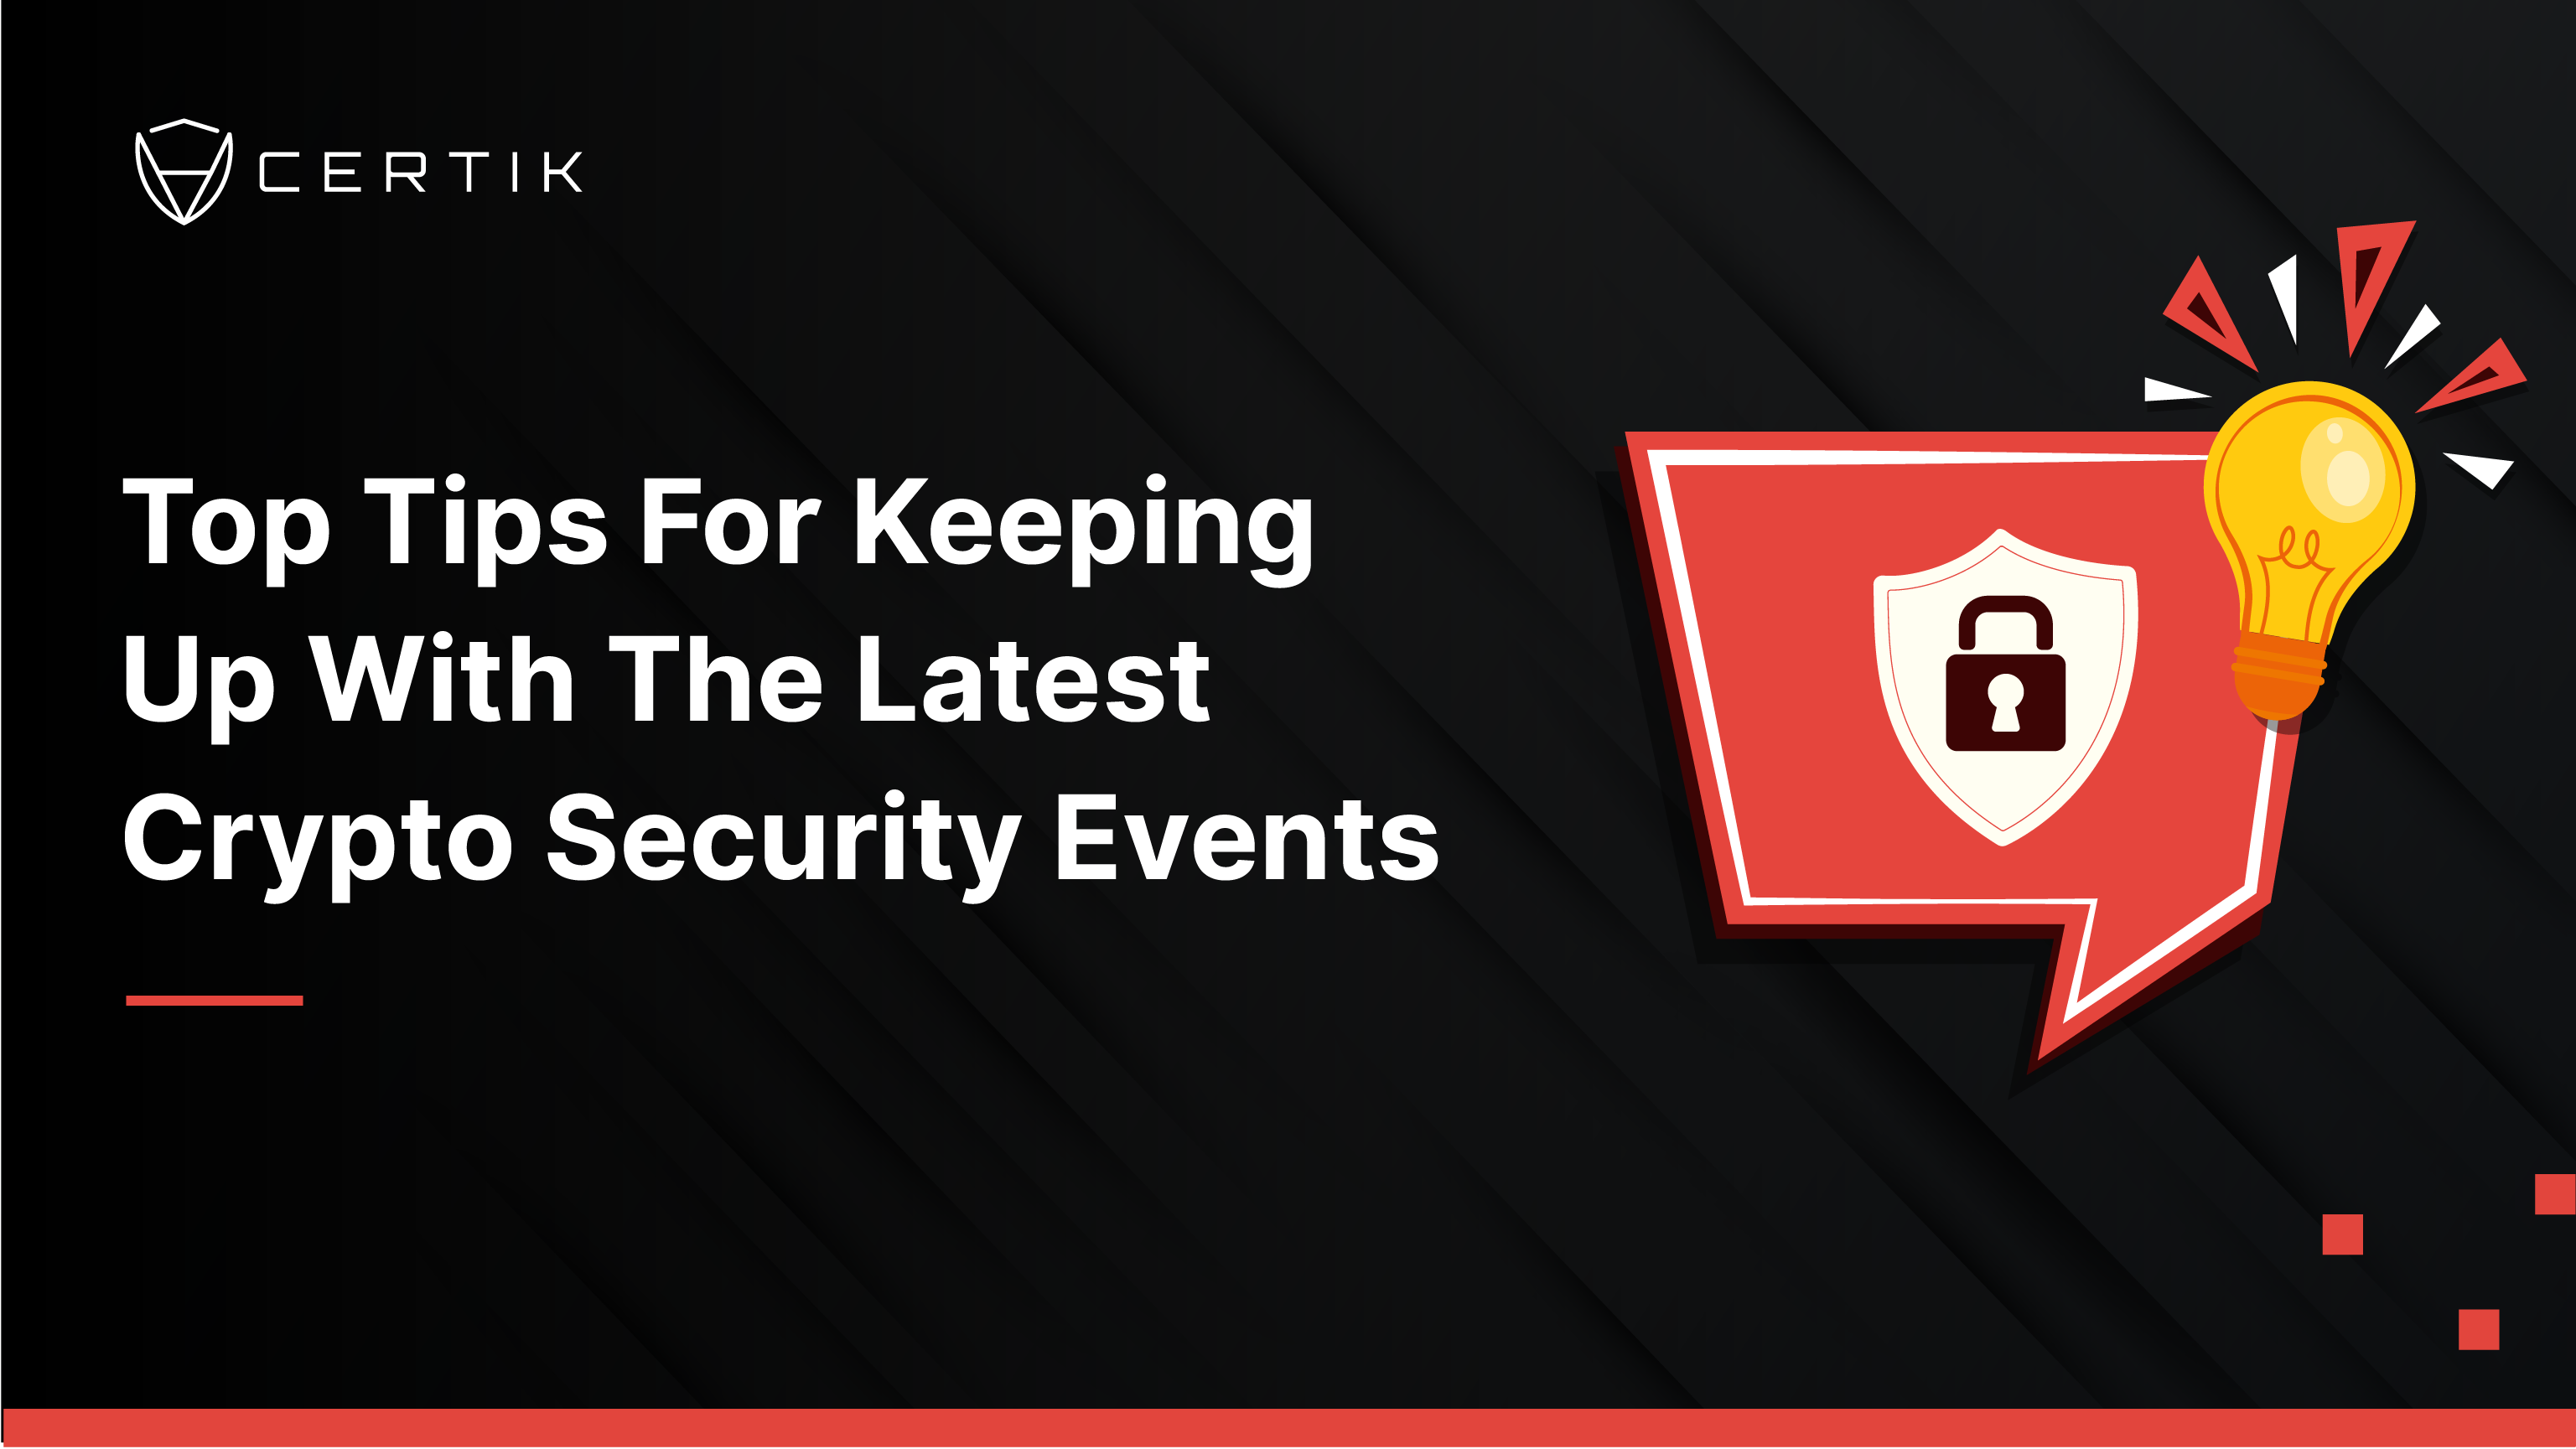 Top Tips For Keeping Up With The Latest Crypto Security Events